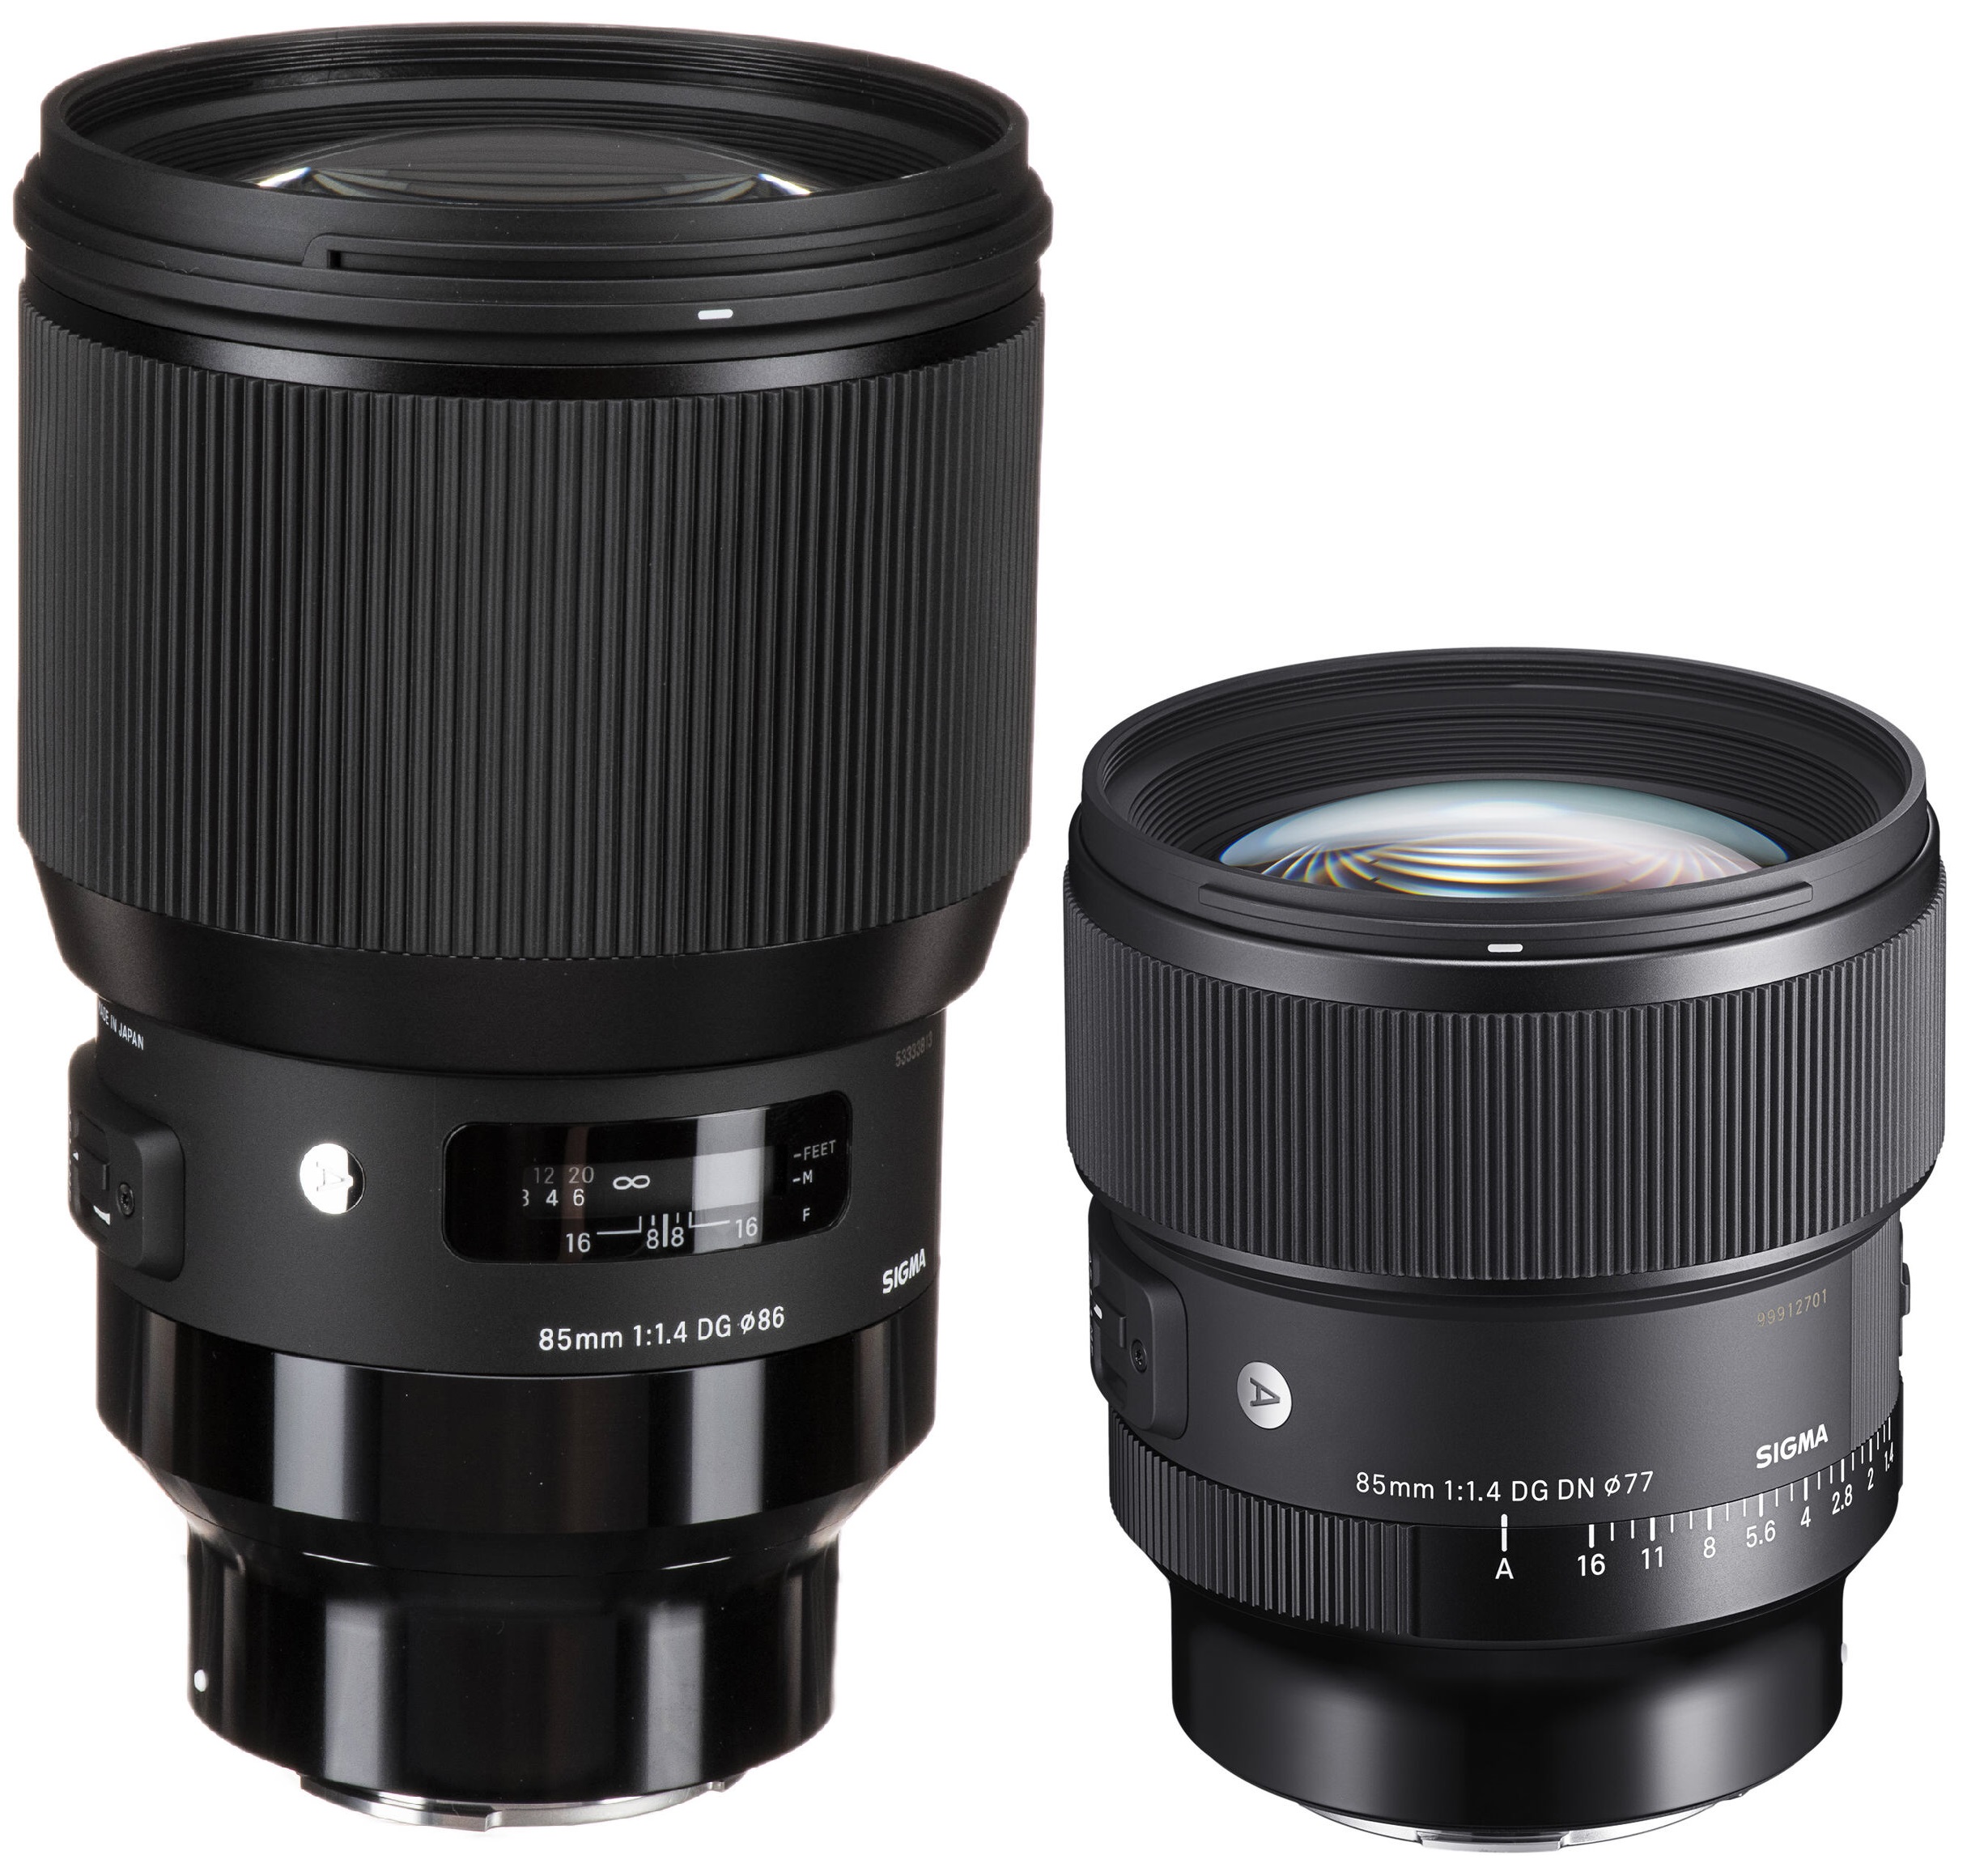 SIGMA 85mm F1.4 DG DN Art Lens - New Fast and Compact Full-Frame 